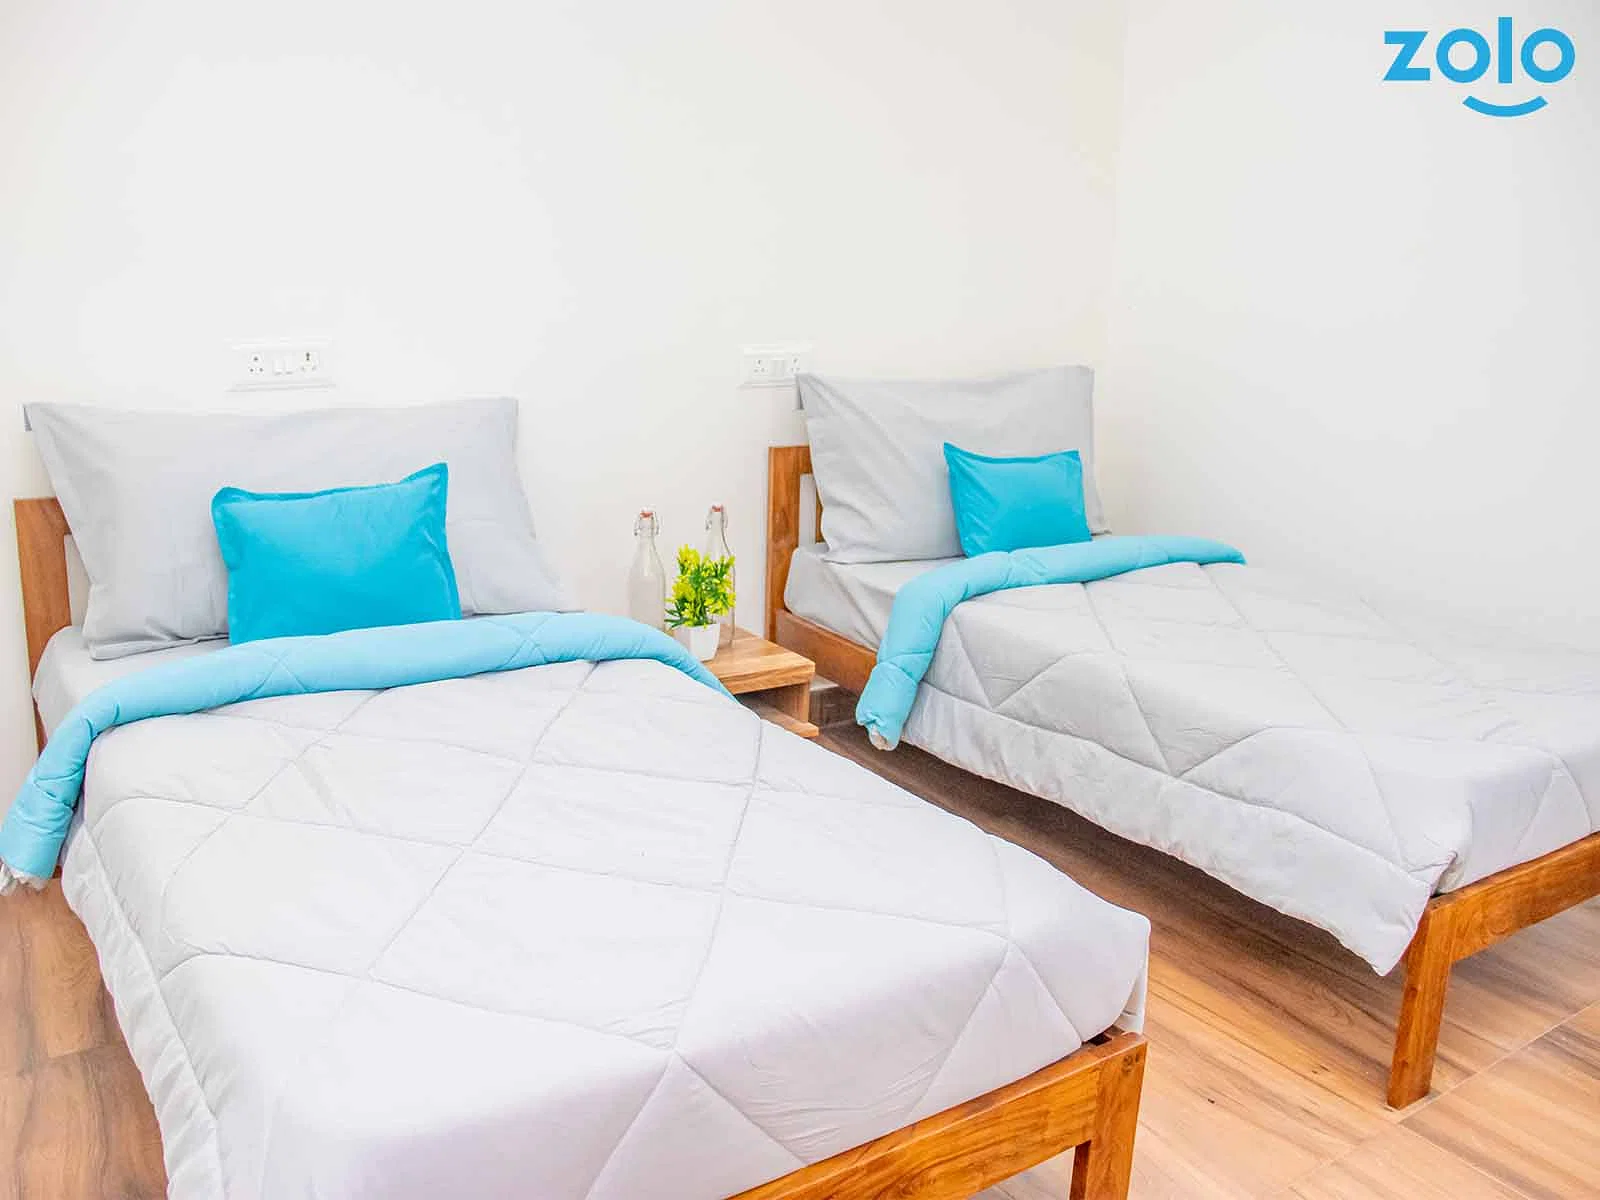 fully furnished Zolo single rooms for rent near me-check out now-Zolo Akshala